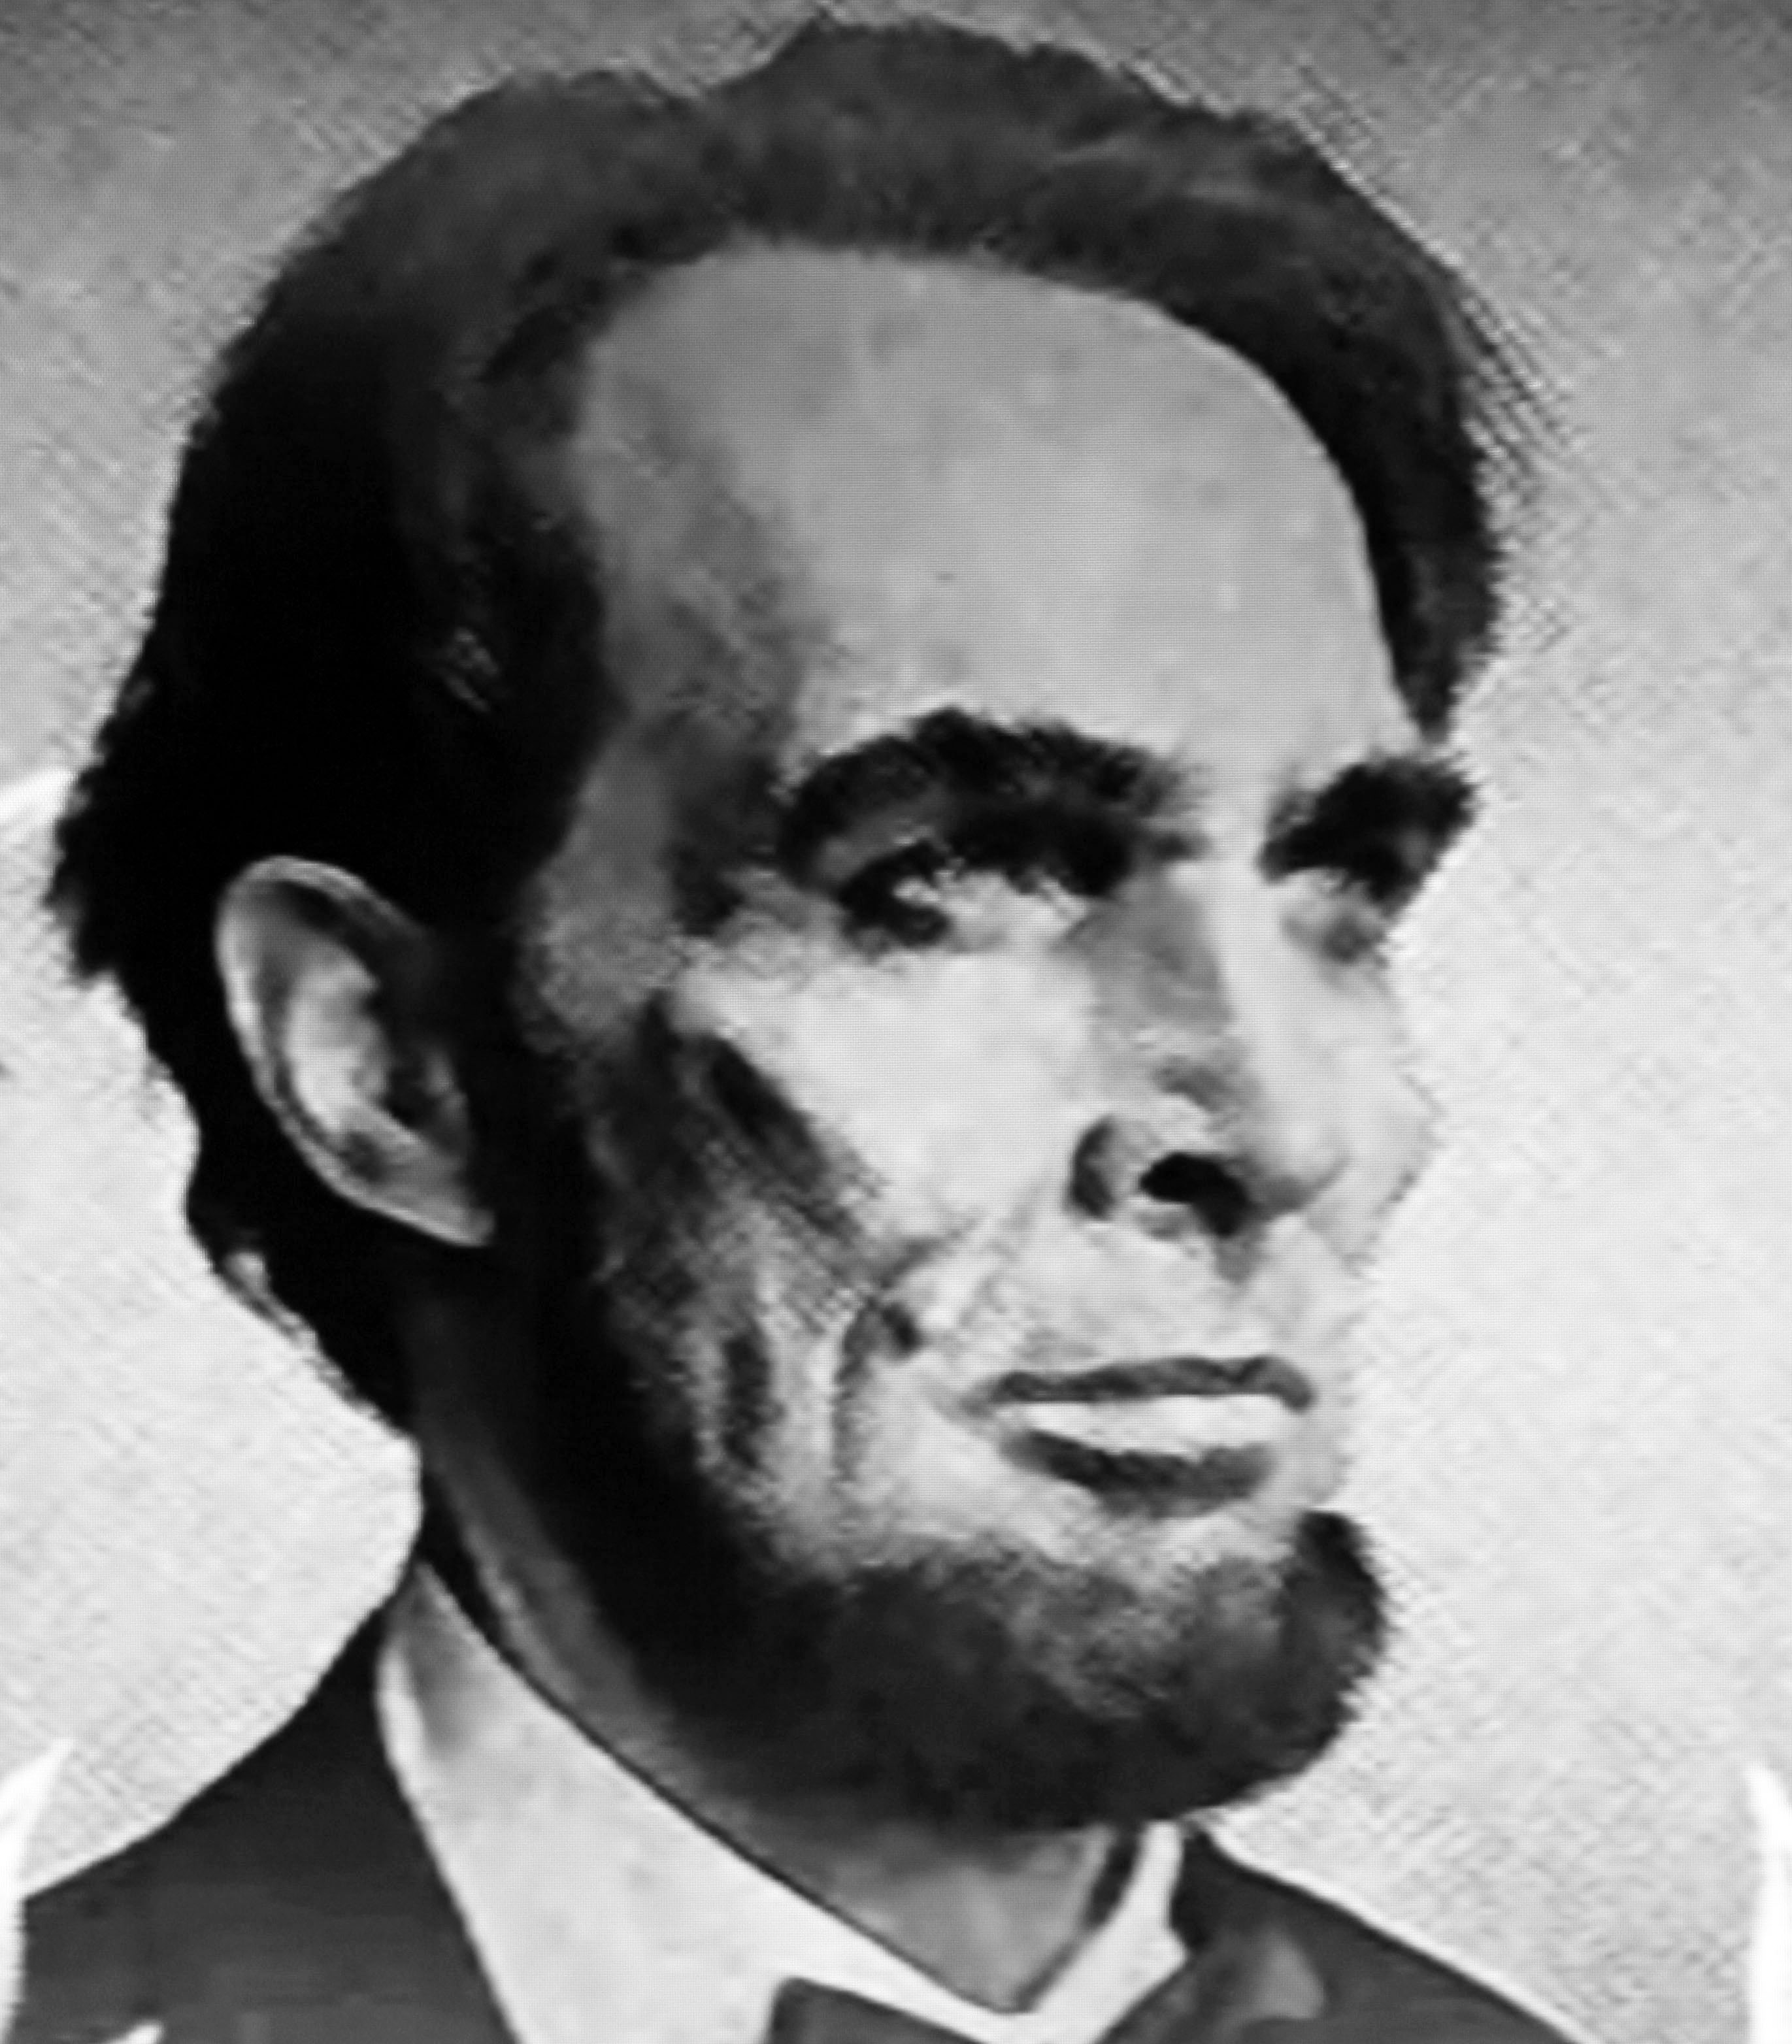 Mark as Abraham Lincoln in 